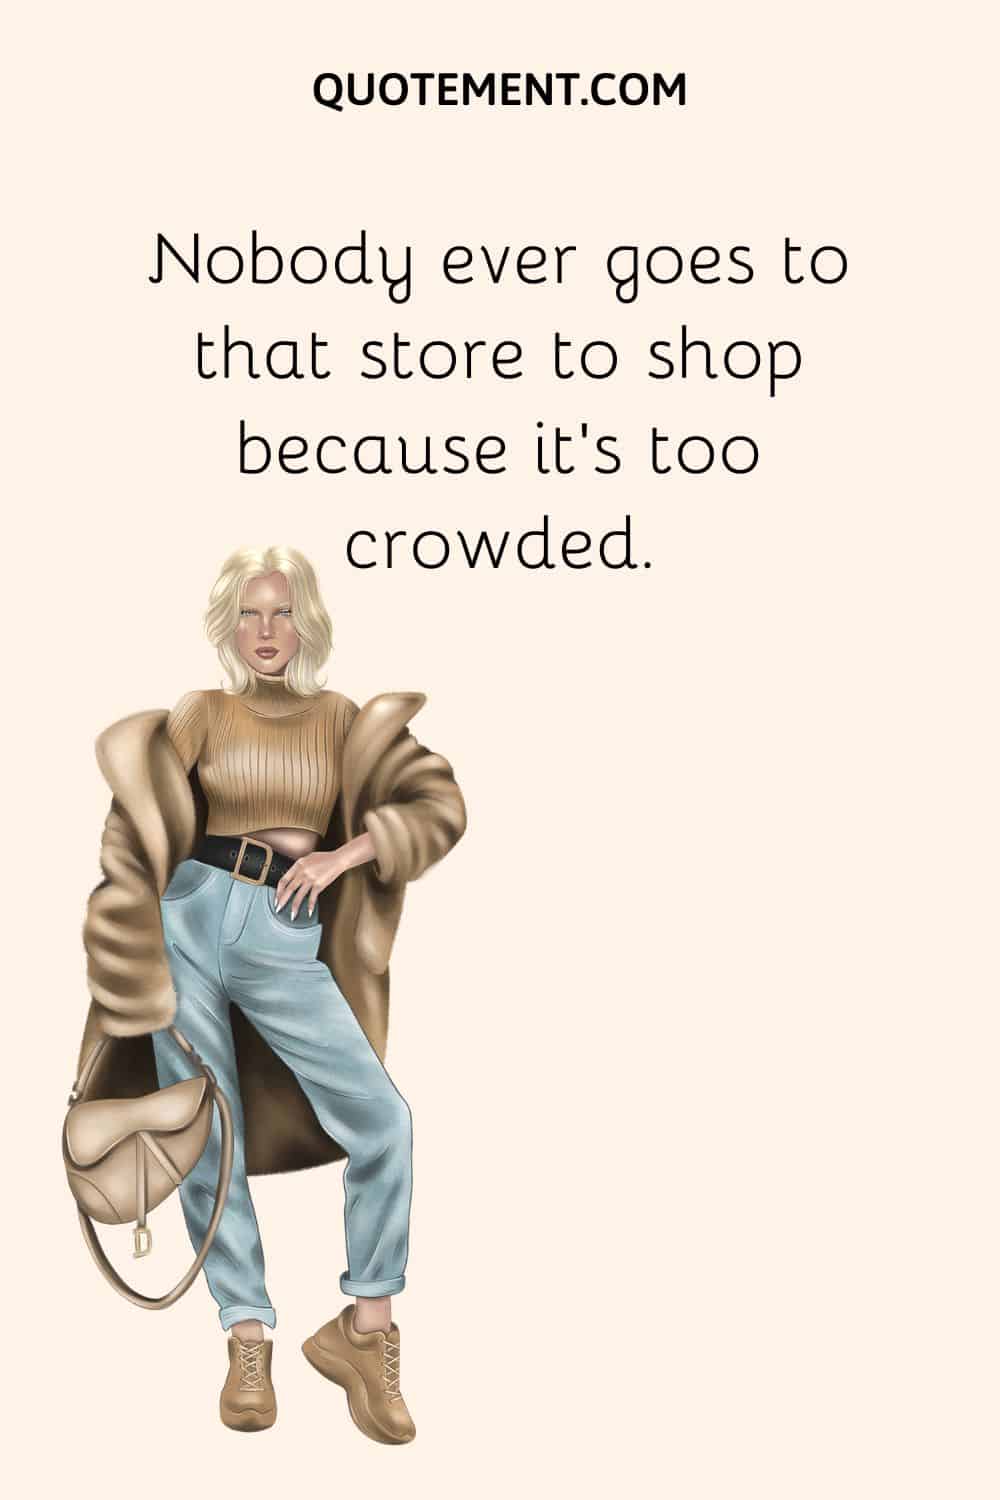 Nobody ever goes to that store to shop because it’s too crowded